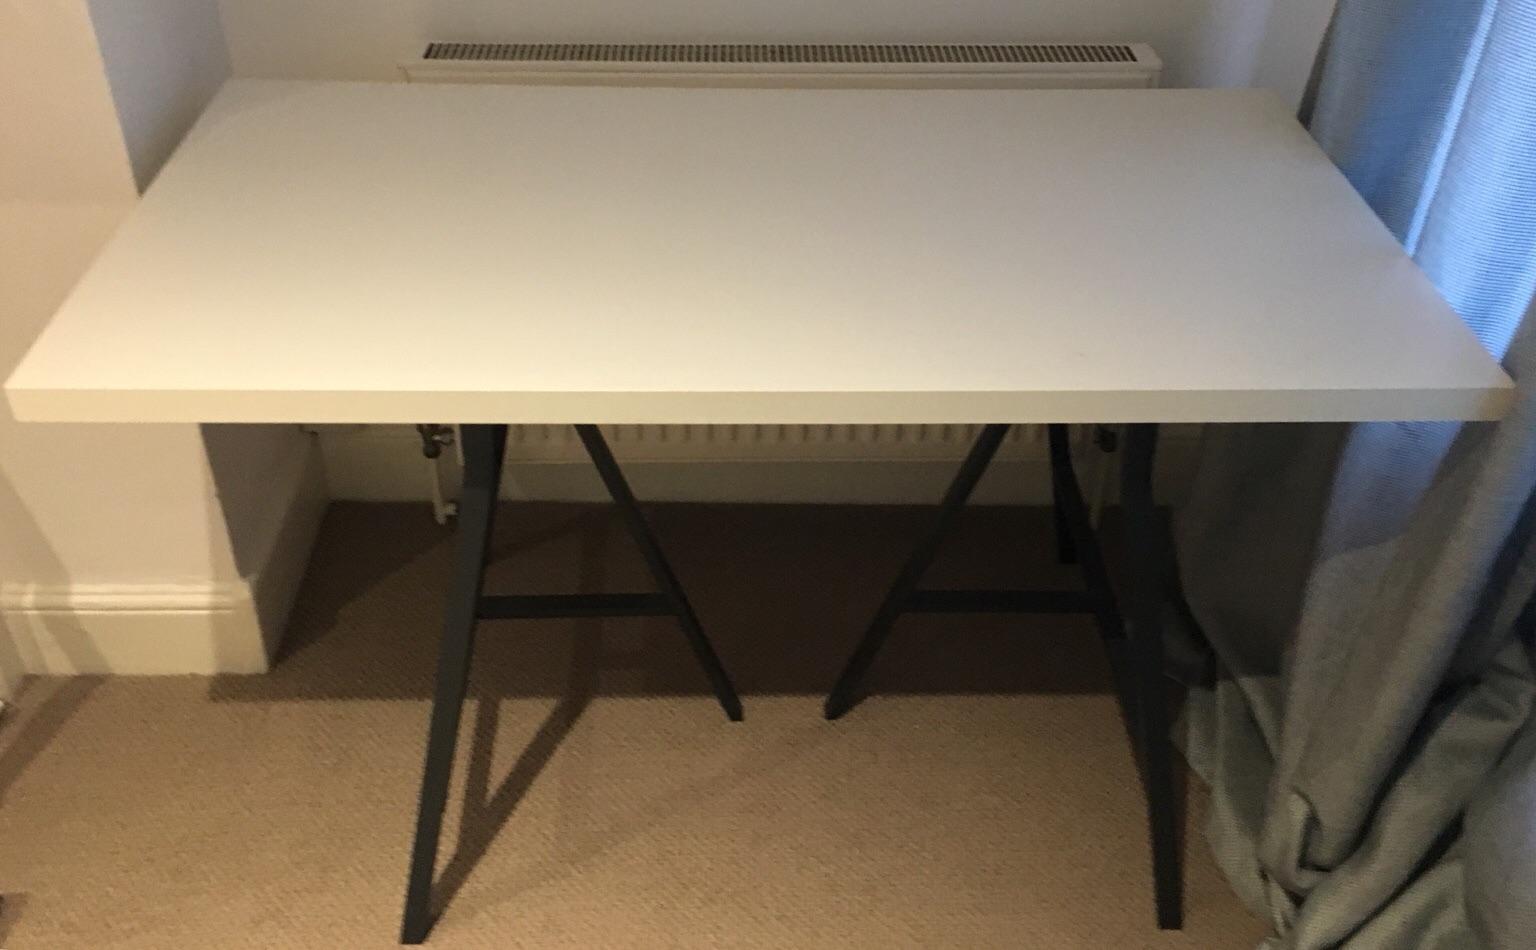 Ikea Vika Amon Table 10 In Rh16 Sussex For 10 00 For Sale Shpock